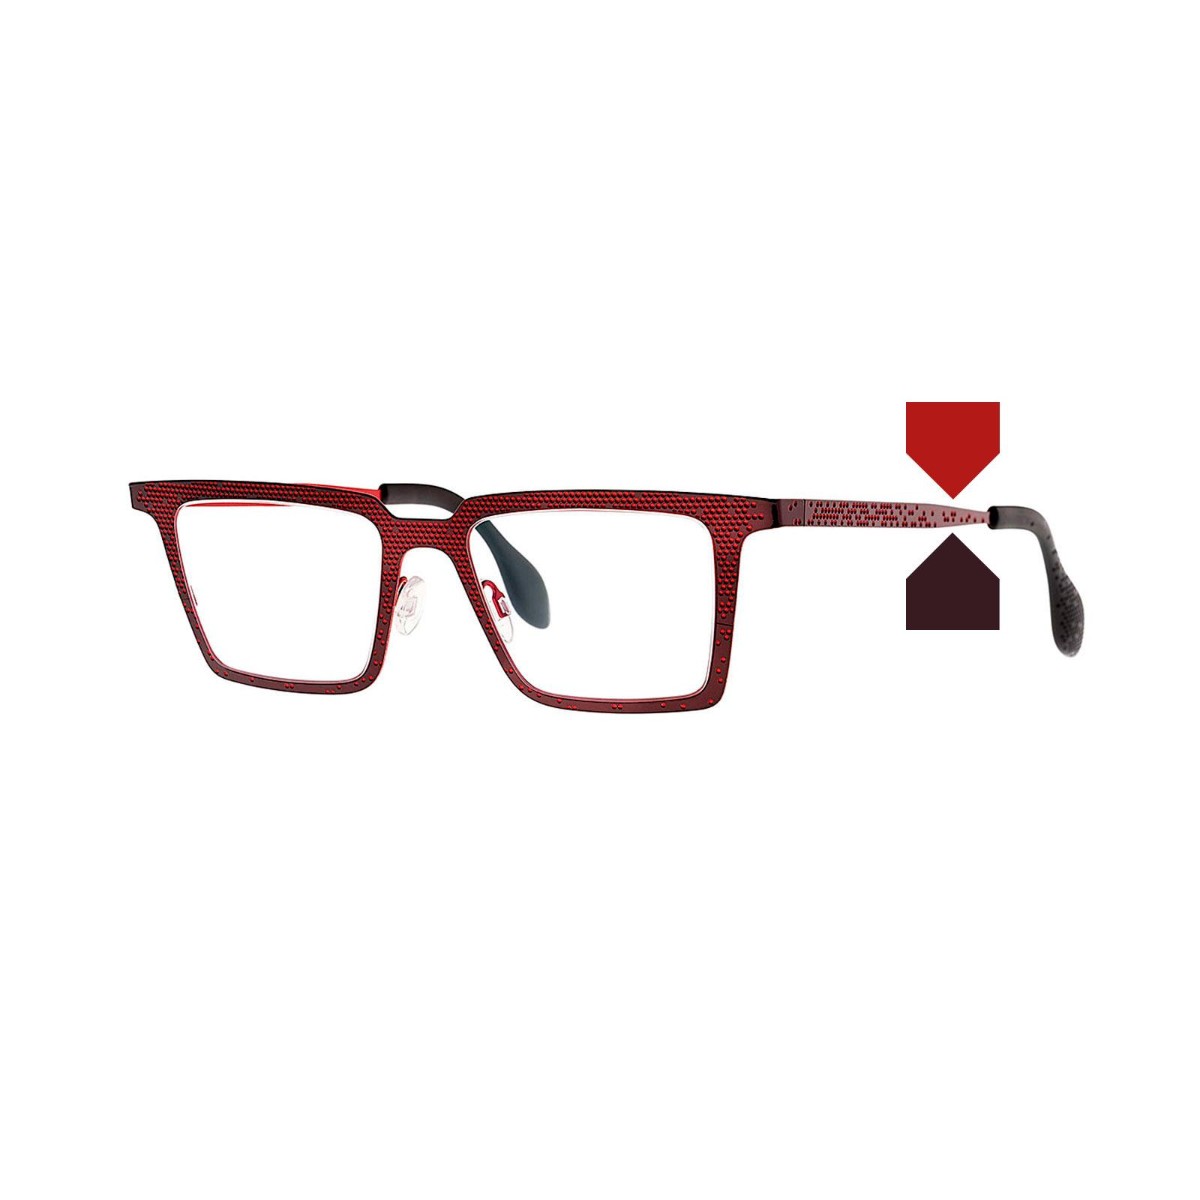 Theo - Mille+63 311 Burgundy/Red